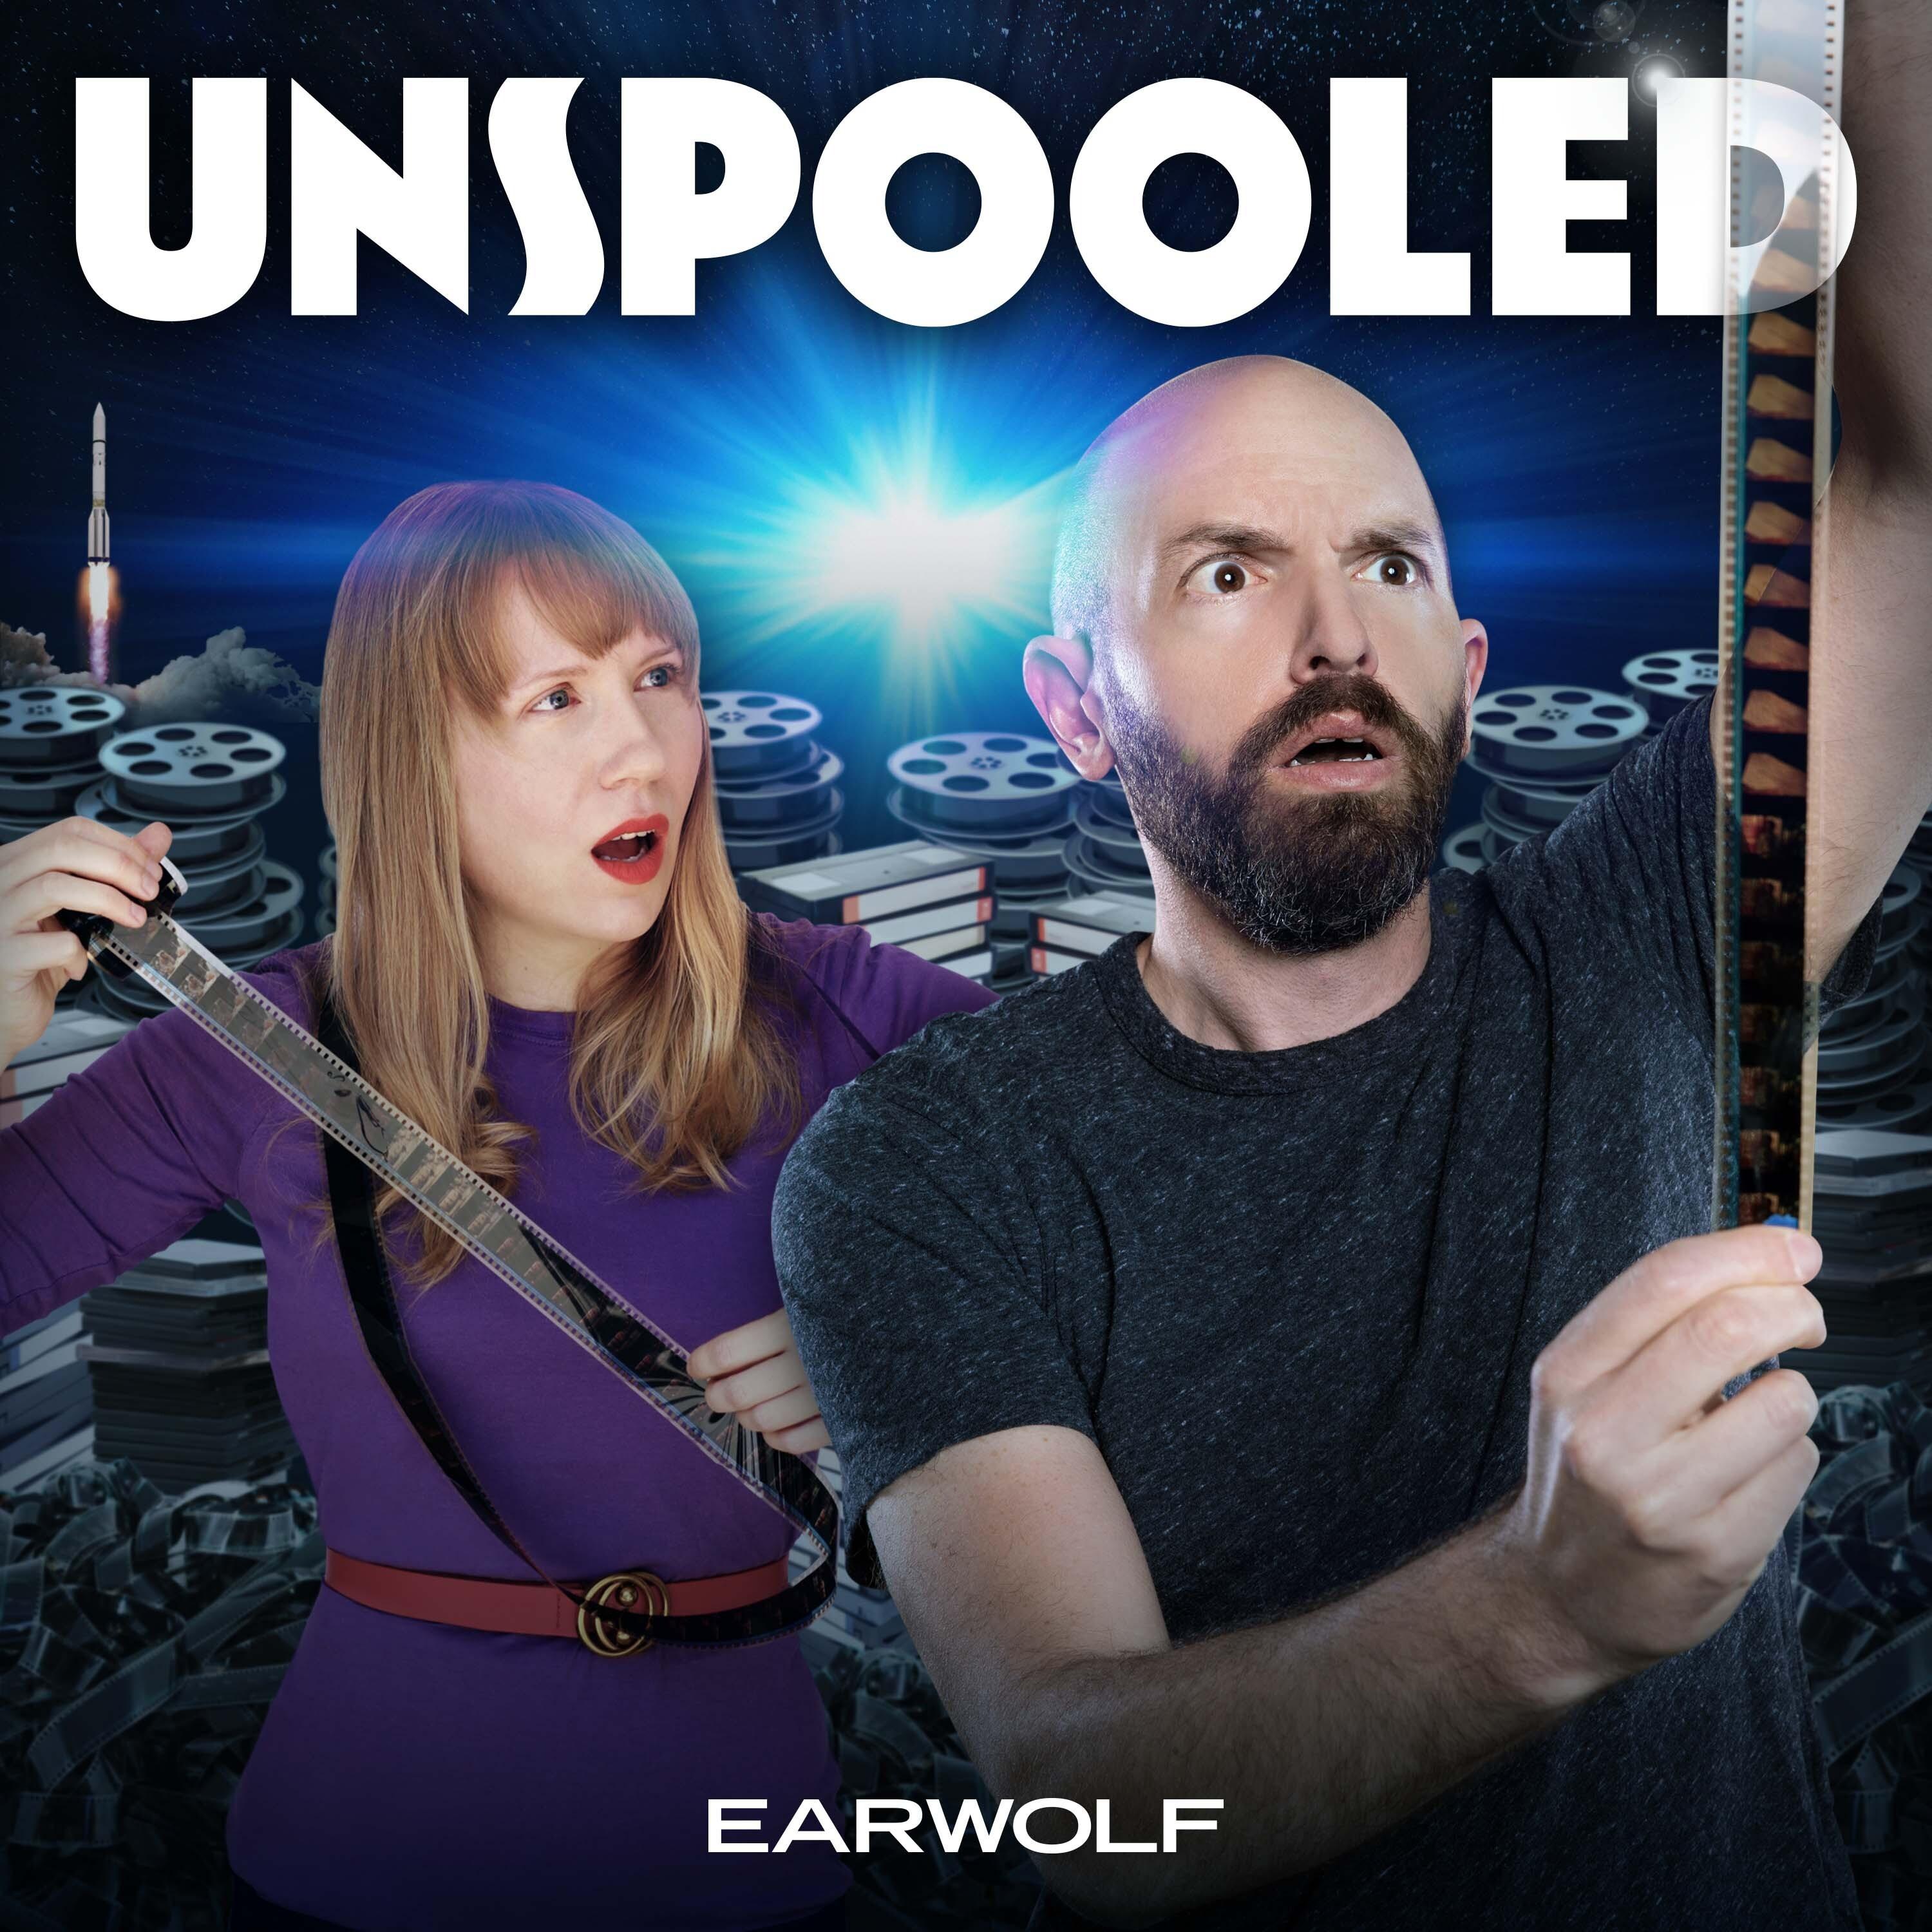 Show poster of Unspooled